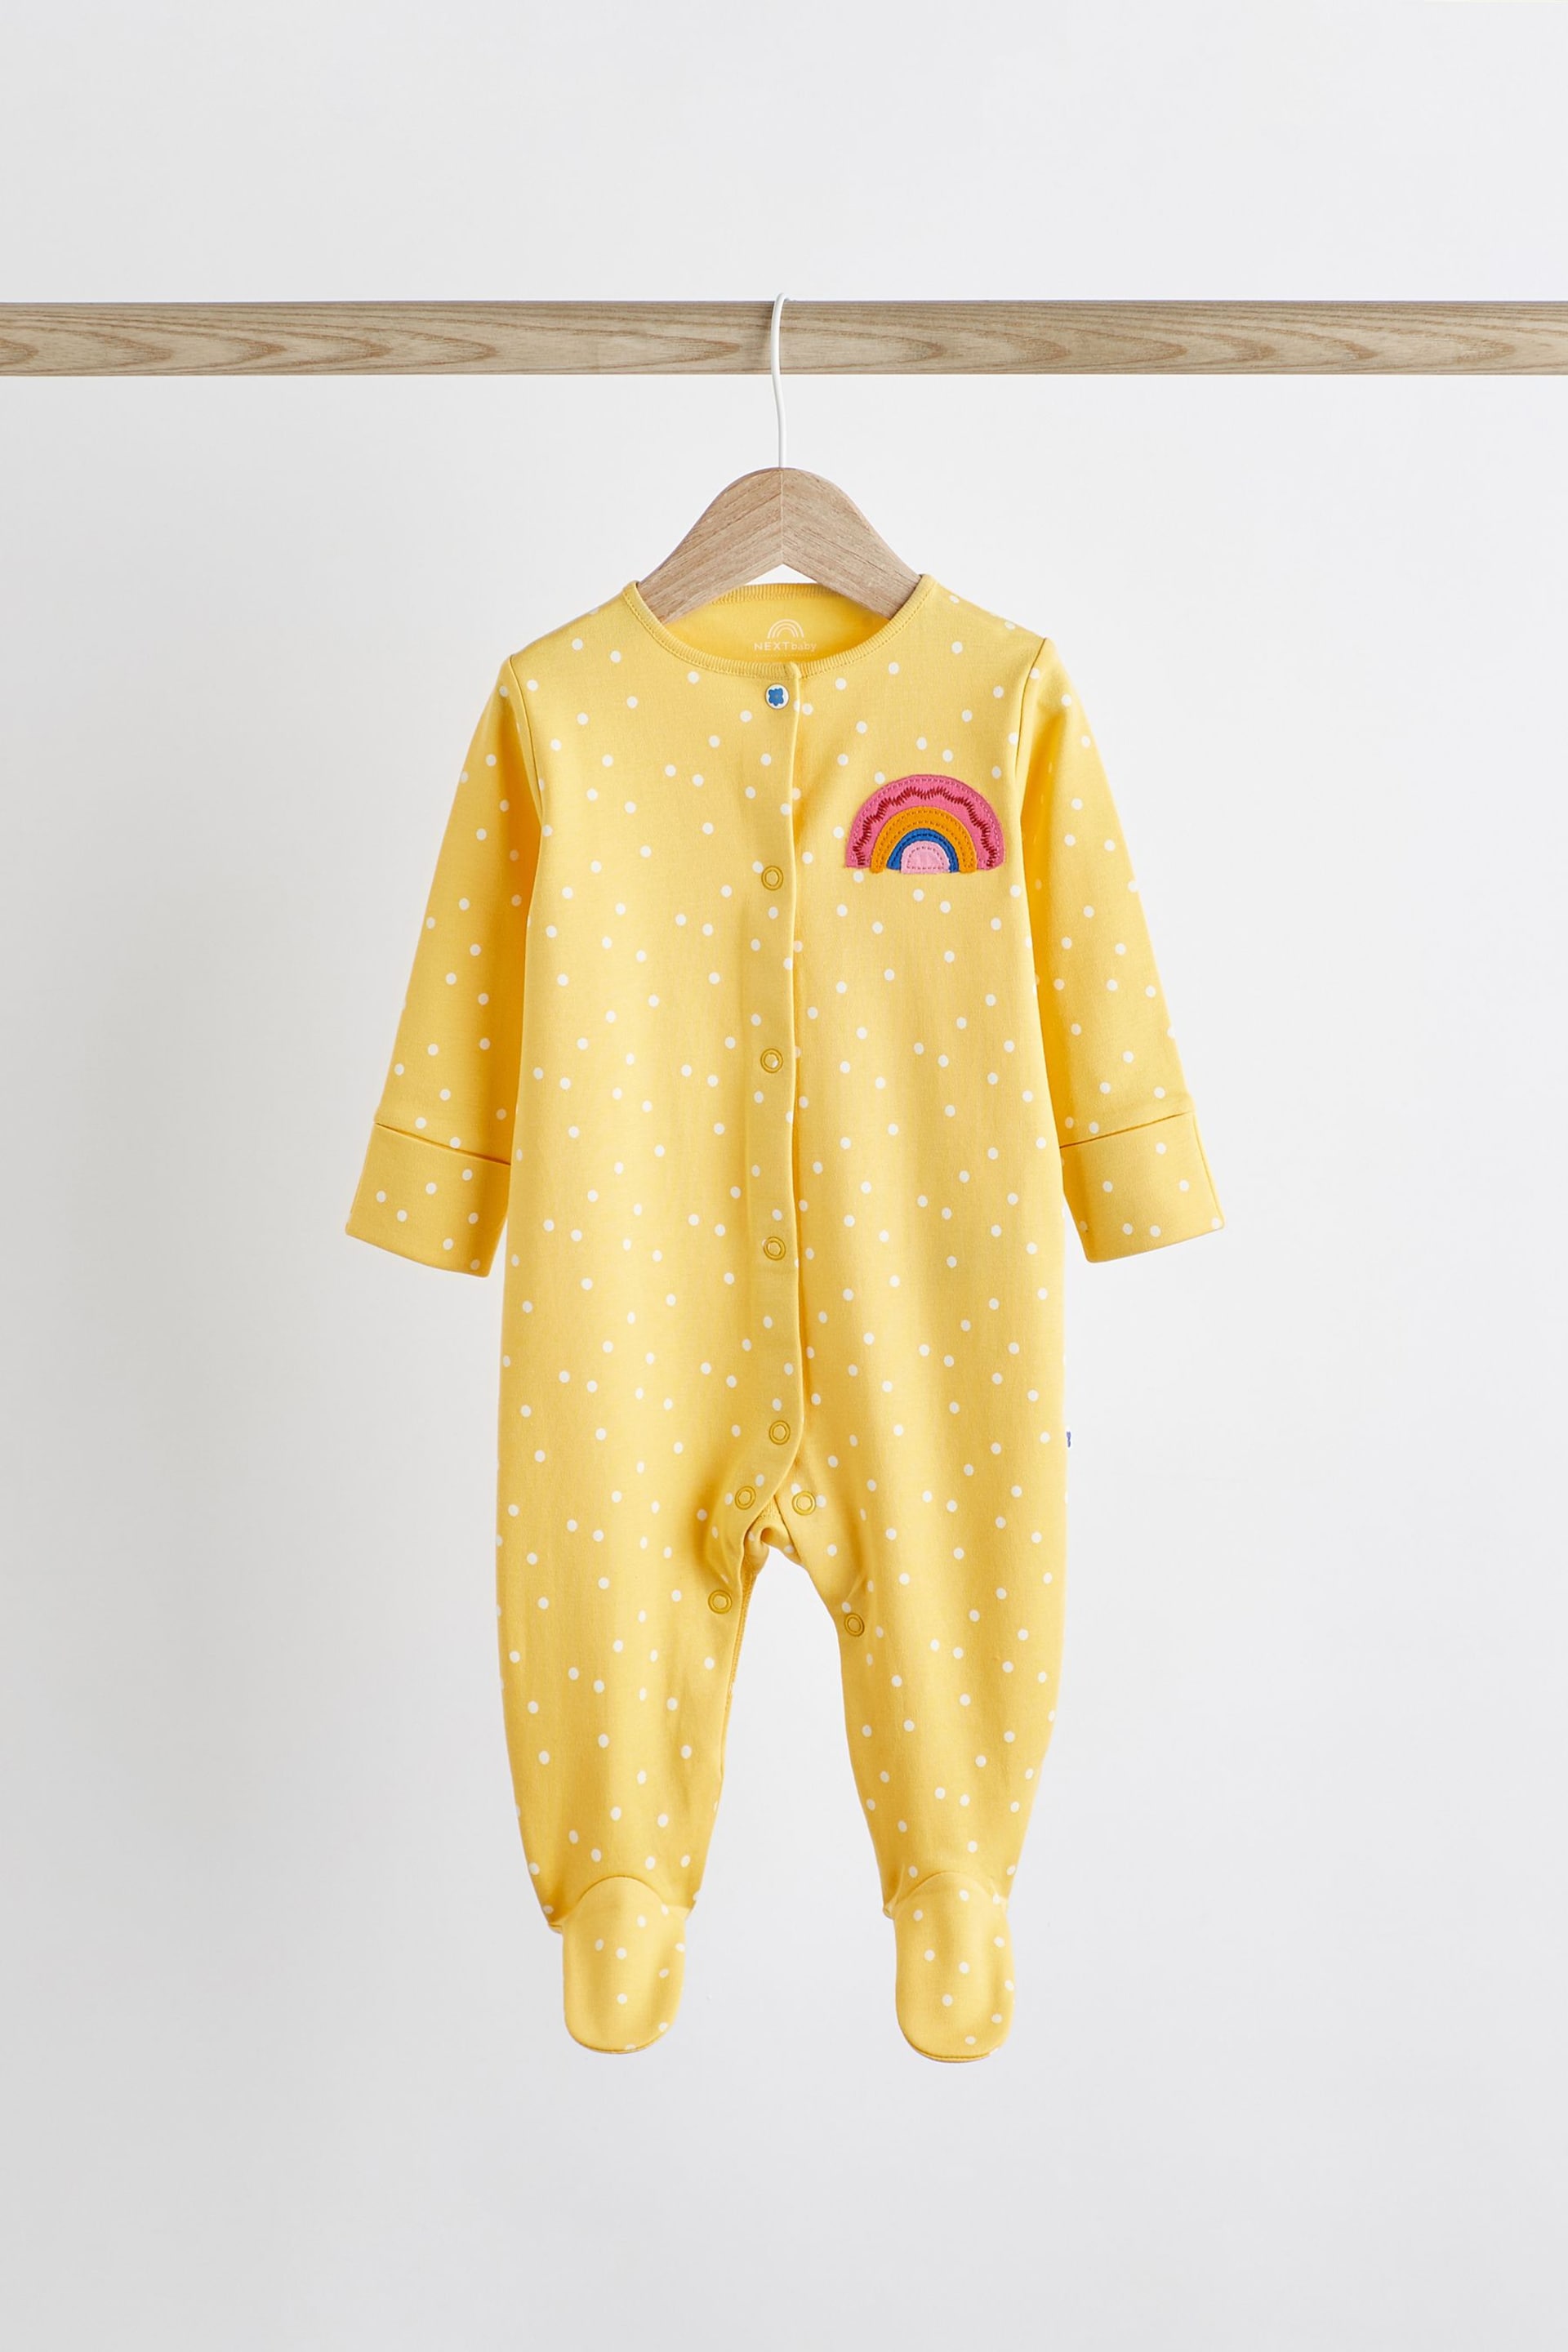 Multi Bright Baby 4 Pack Footed Sleepsuits (0-3yrs) - Image 6 of 13